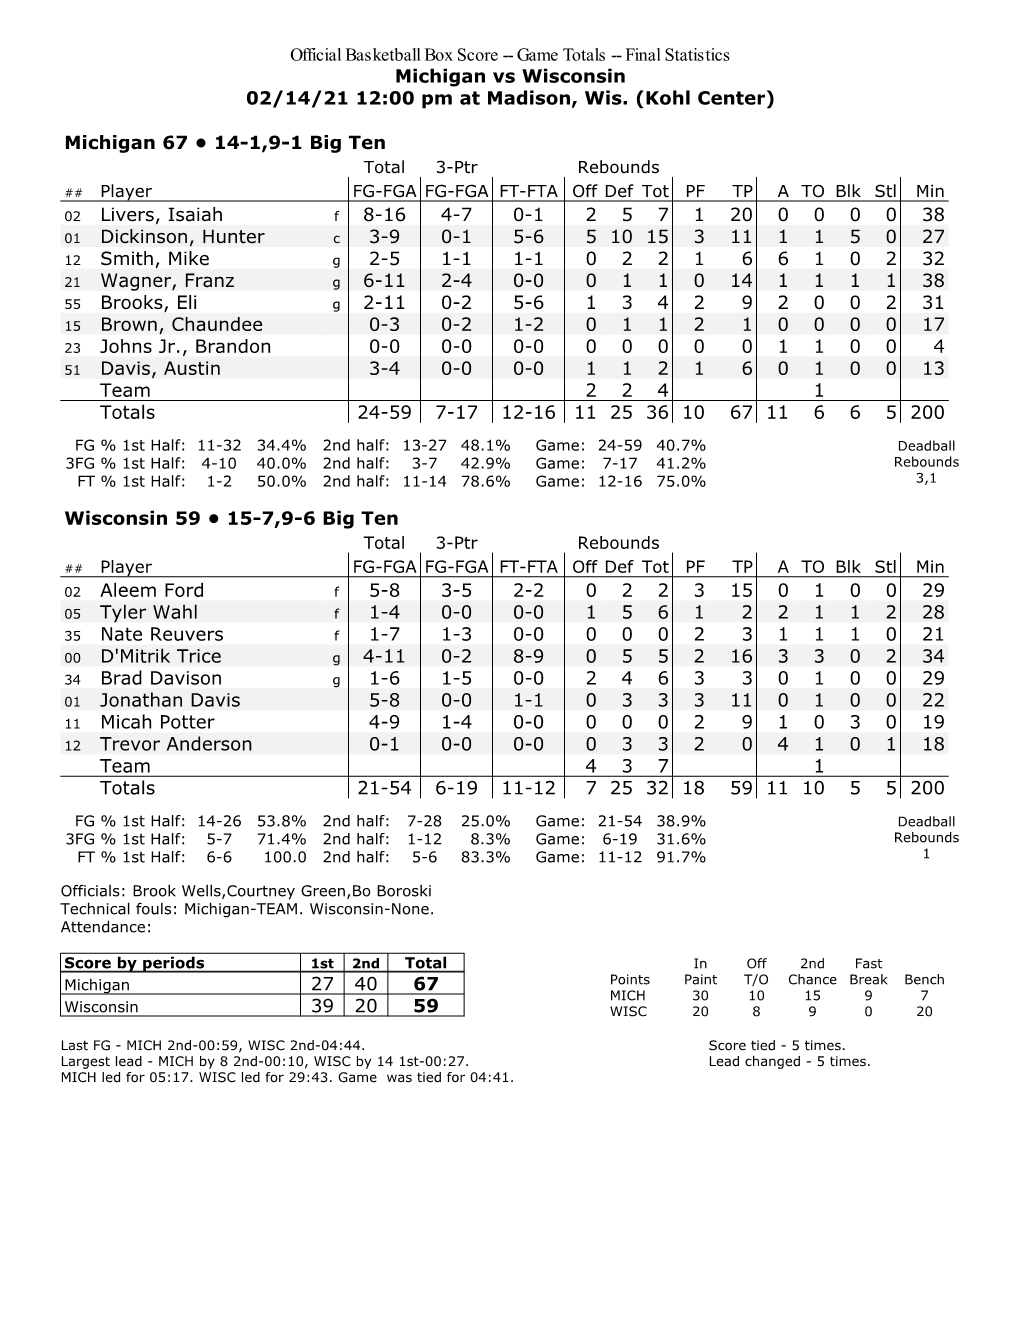 Official Basketball Box Score -- Game Totals -- Final Statistics Michigan Vs Wisconsin 02/14/21 12:00 Pm at Madison, Wis